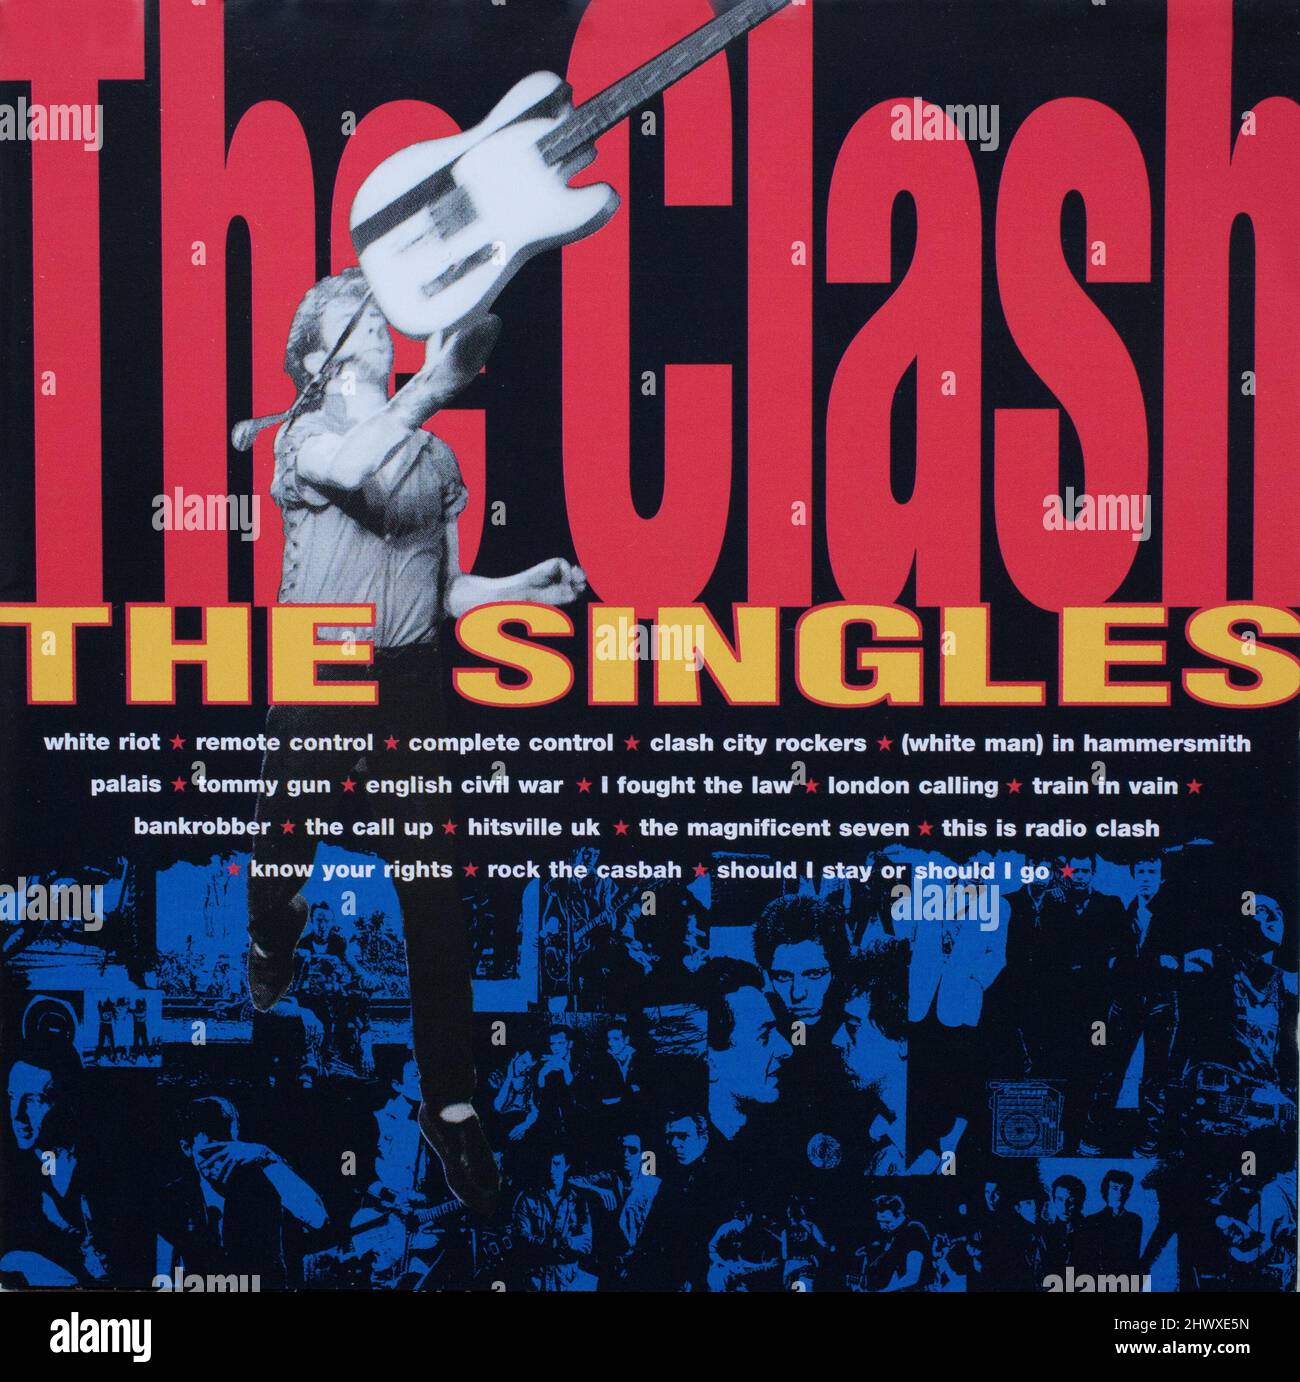 The CD album cover to The Singles by The Clash Stock Photo - Alamy